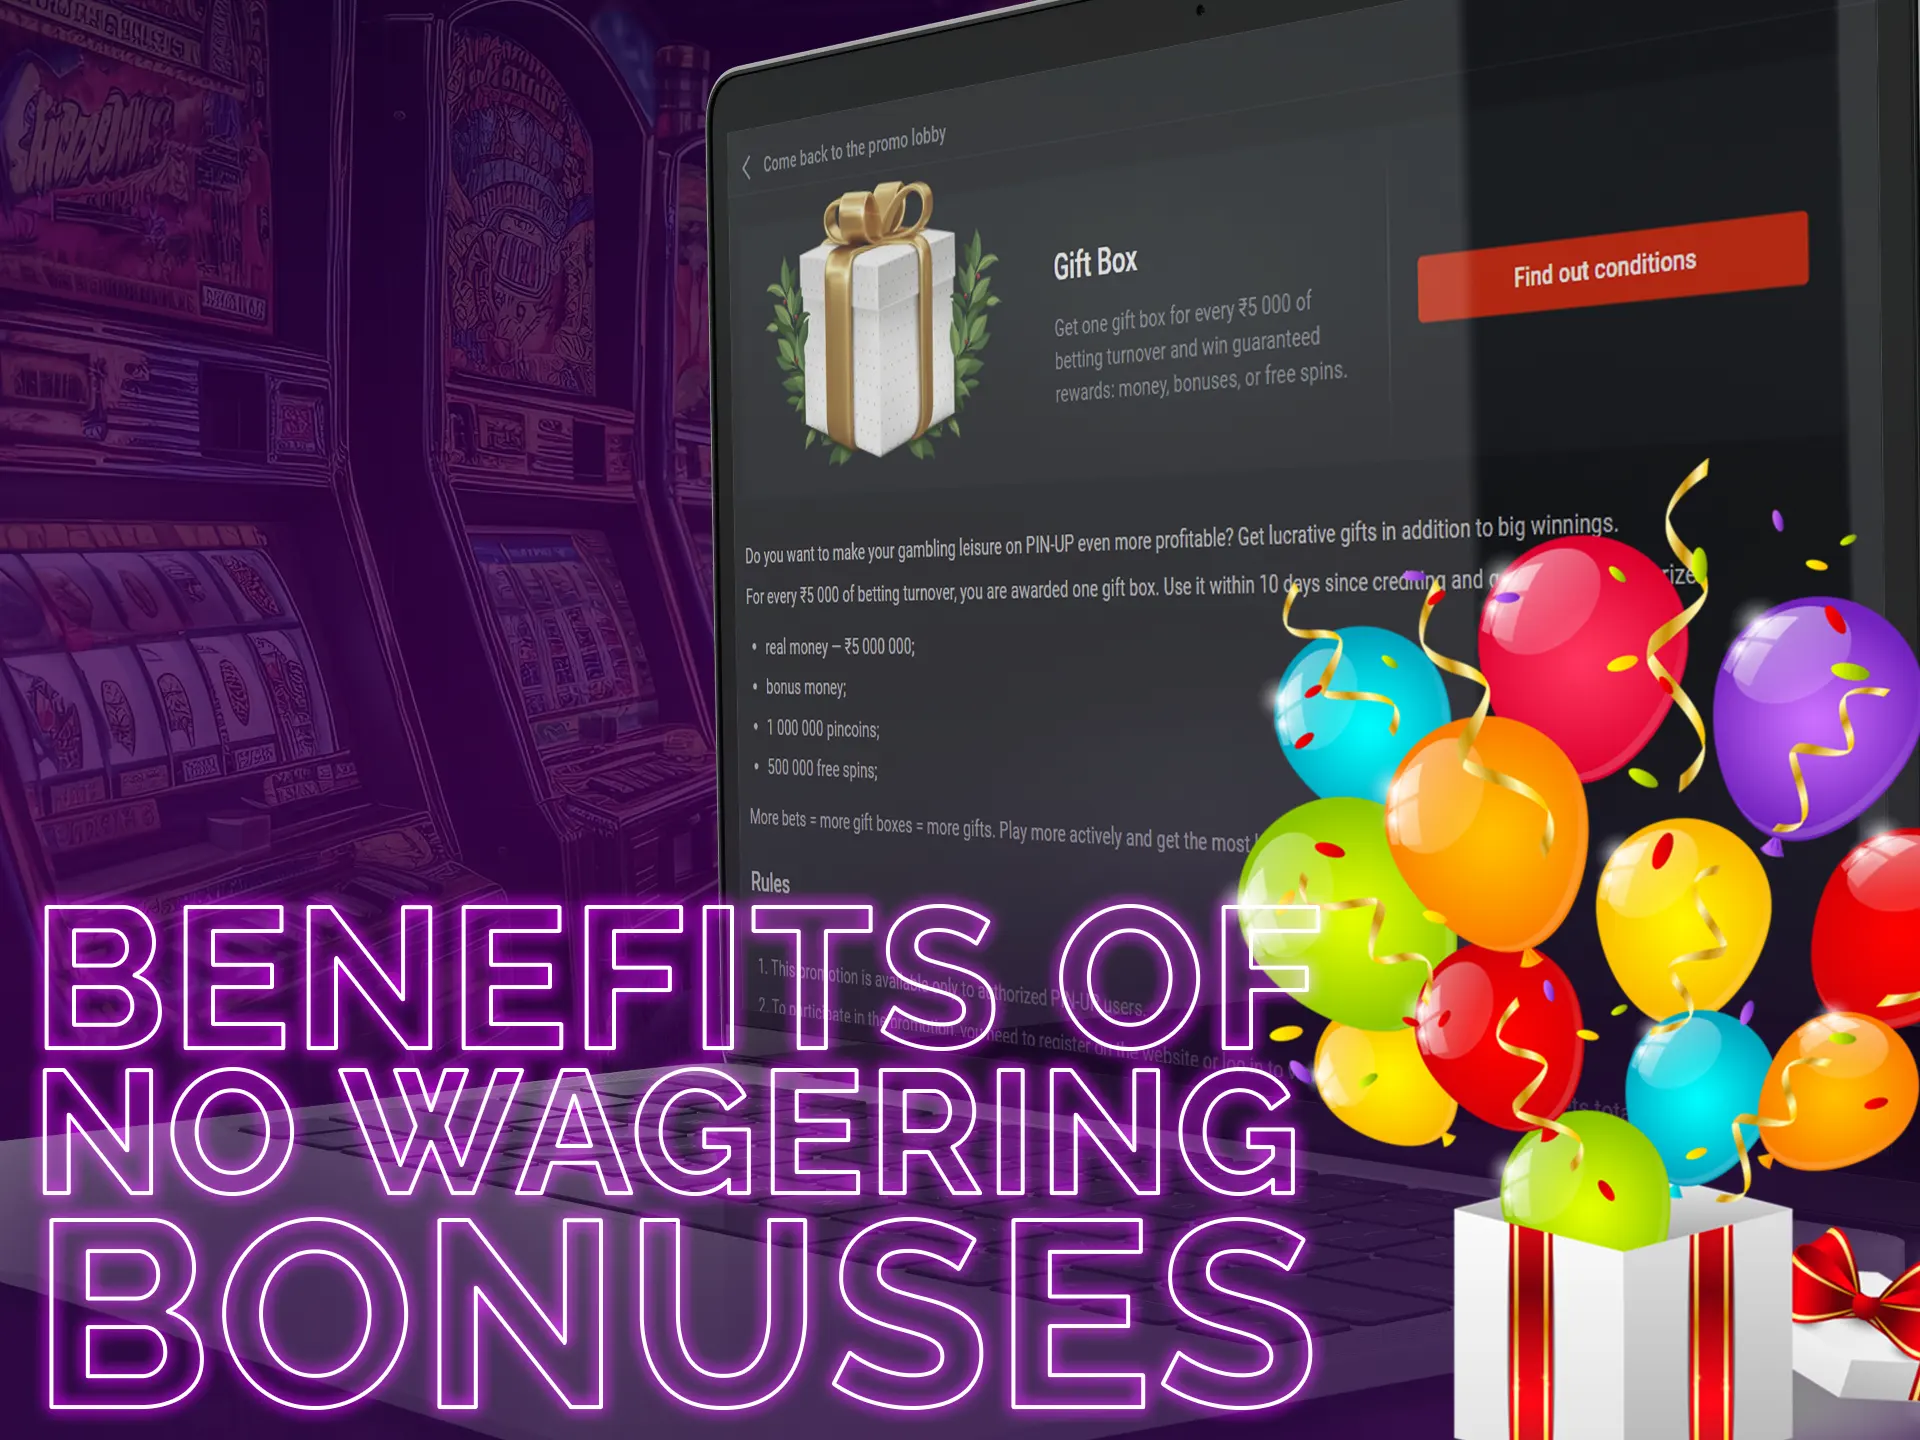 No-wagering bonuses have a specific list of benefits.